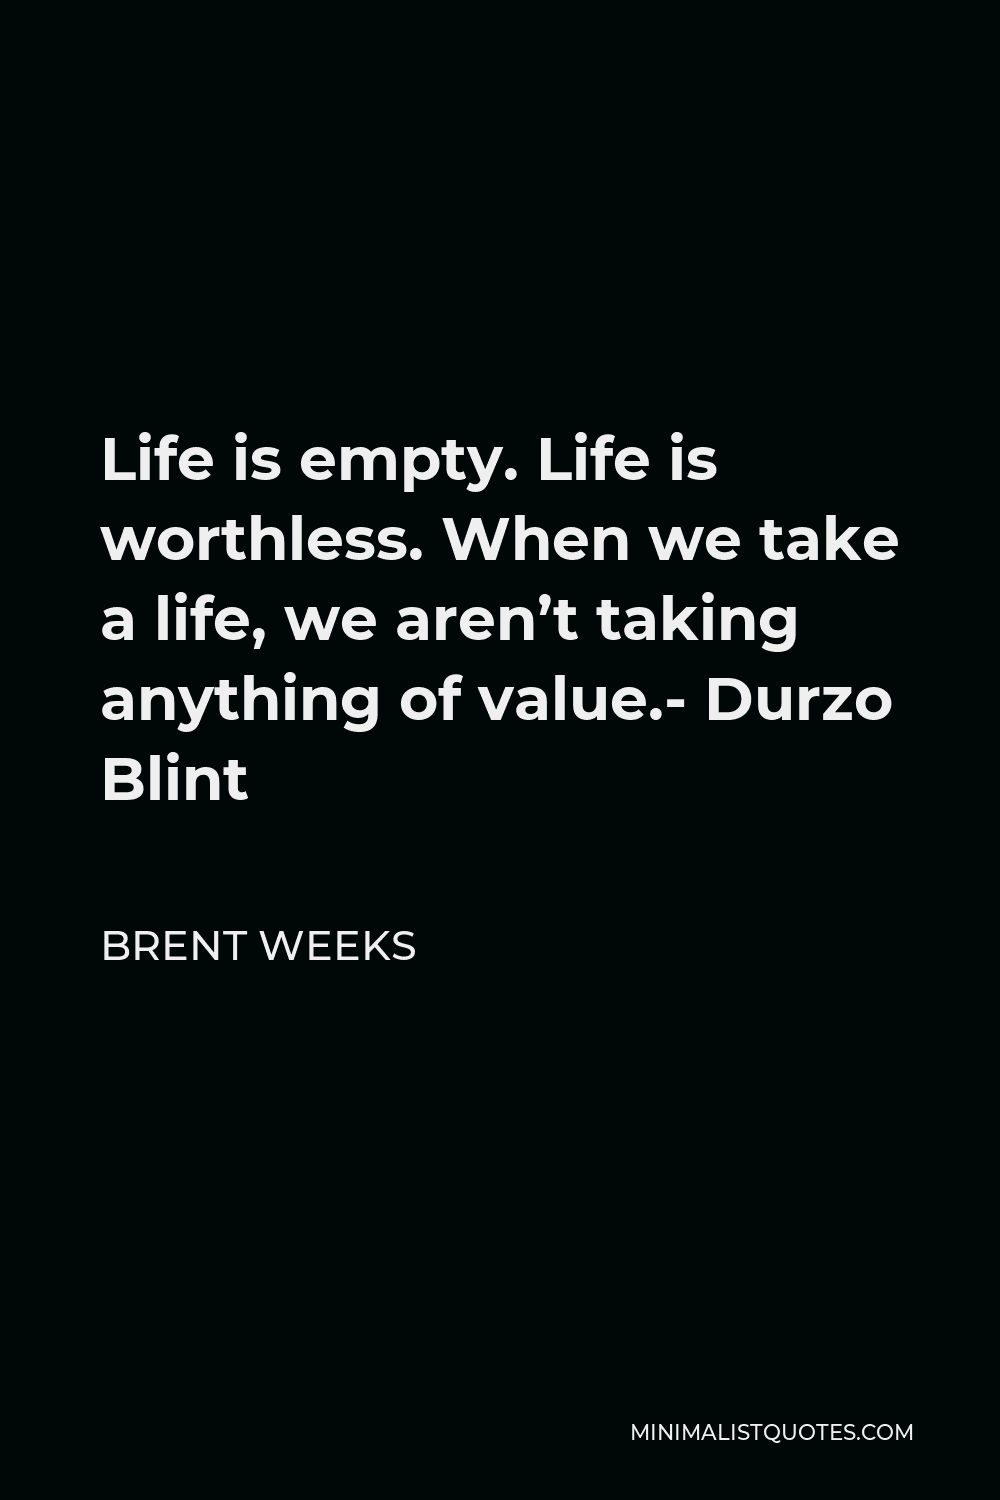 Brent Weeks Quote - Life is empty. Life is worthless. When we take a life, we aren’t taking anything of value.- Durzo Blint